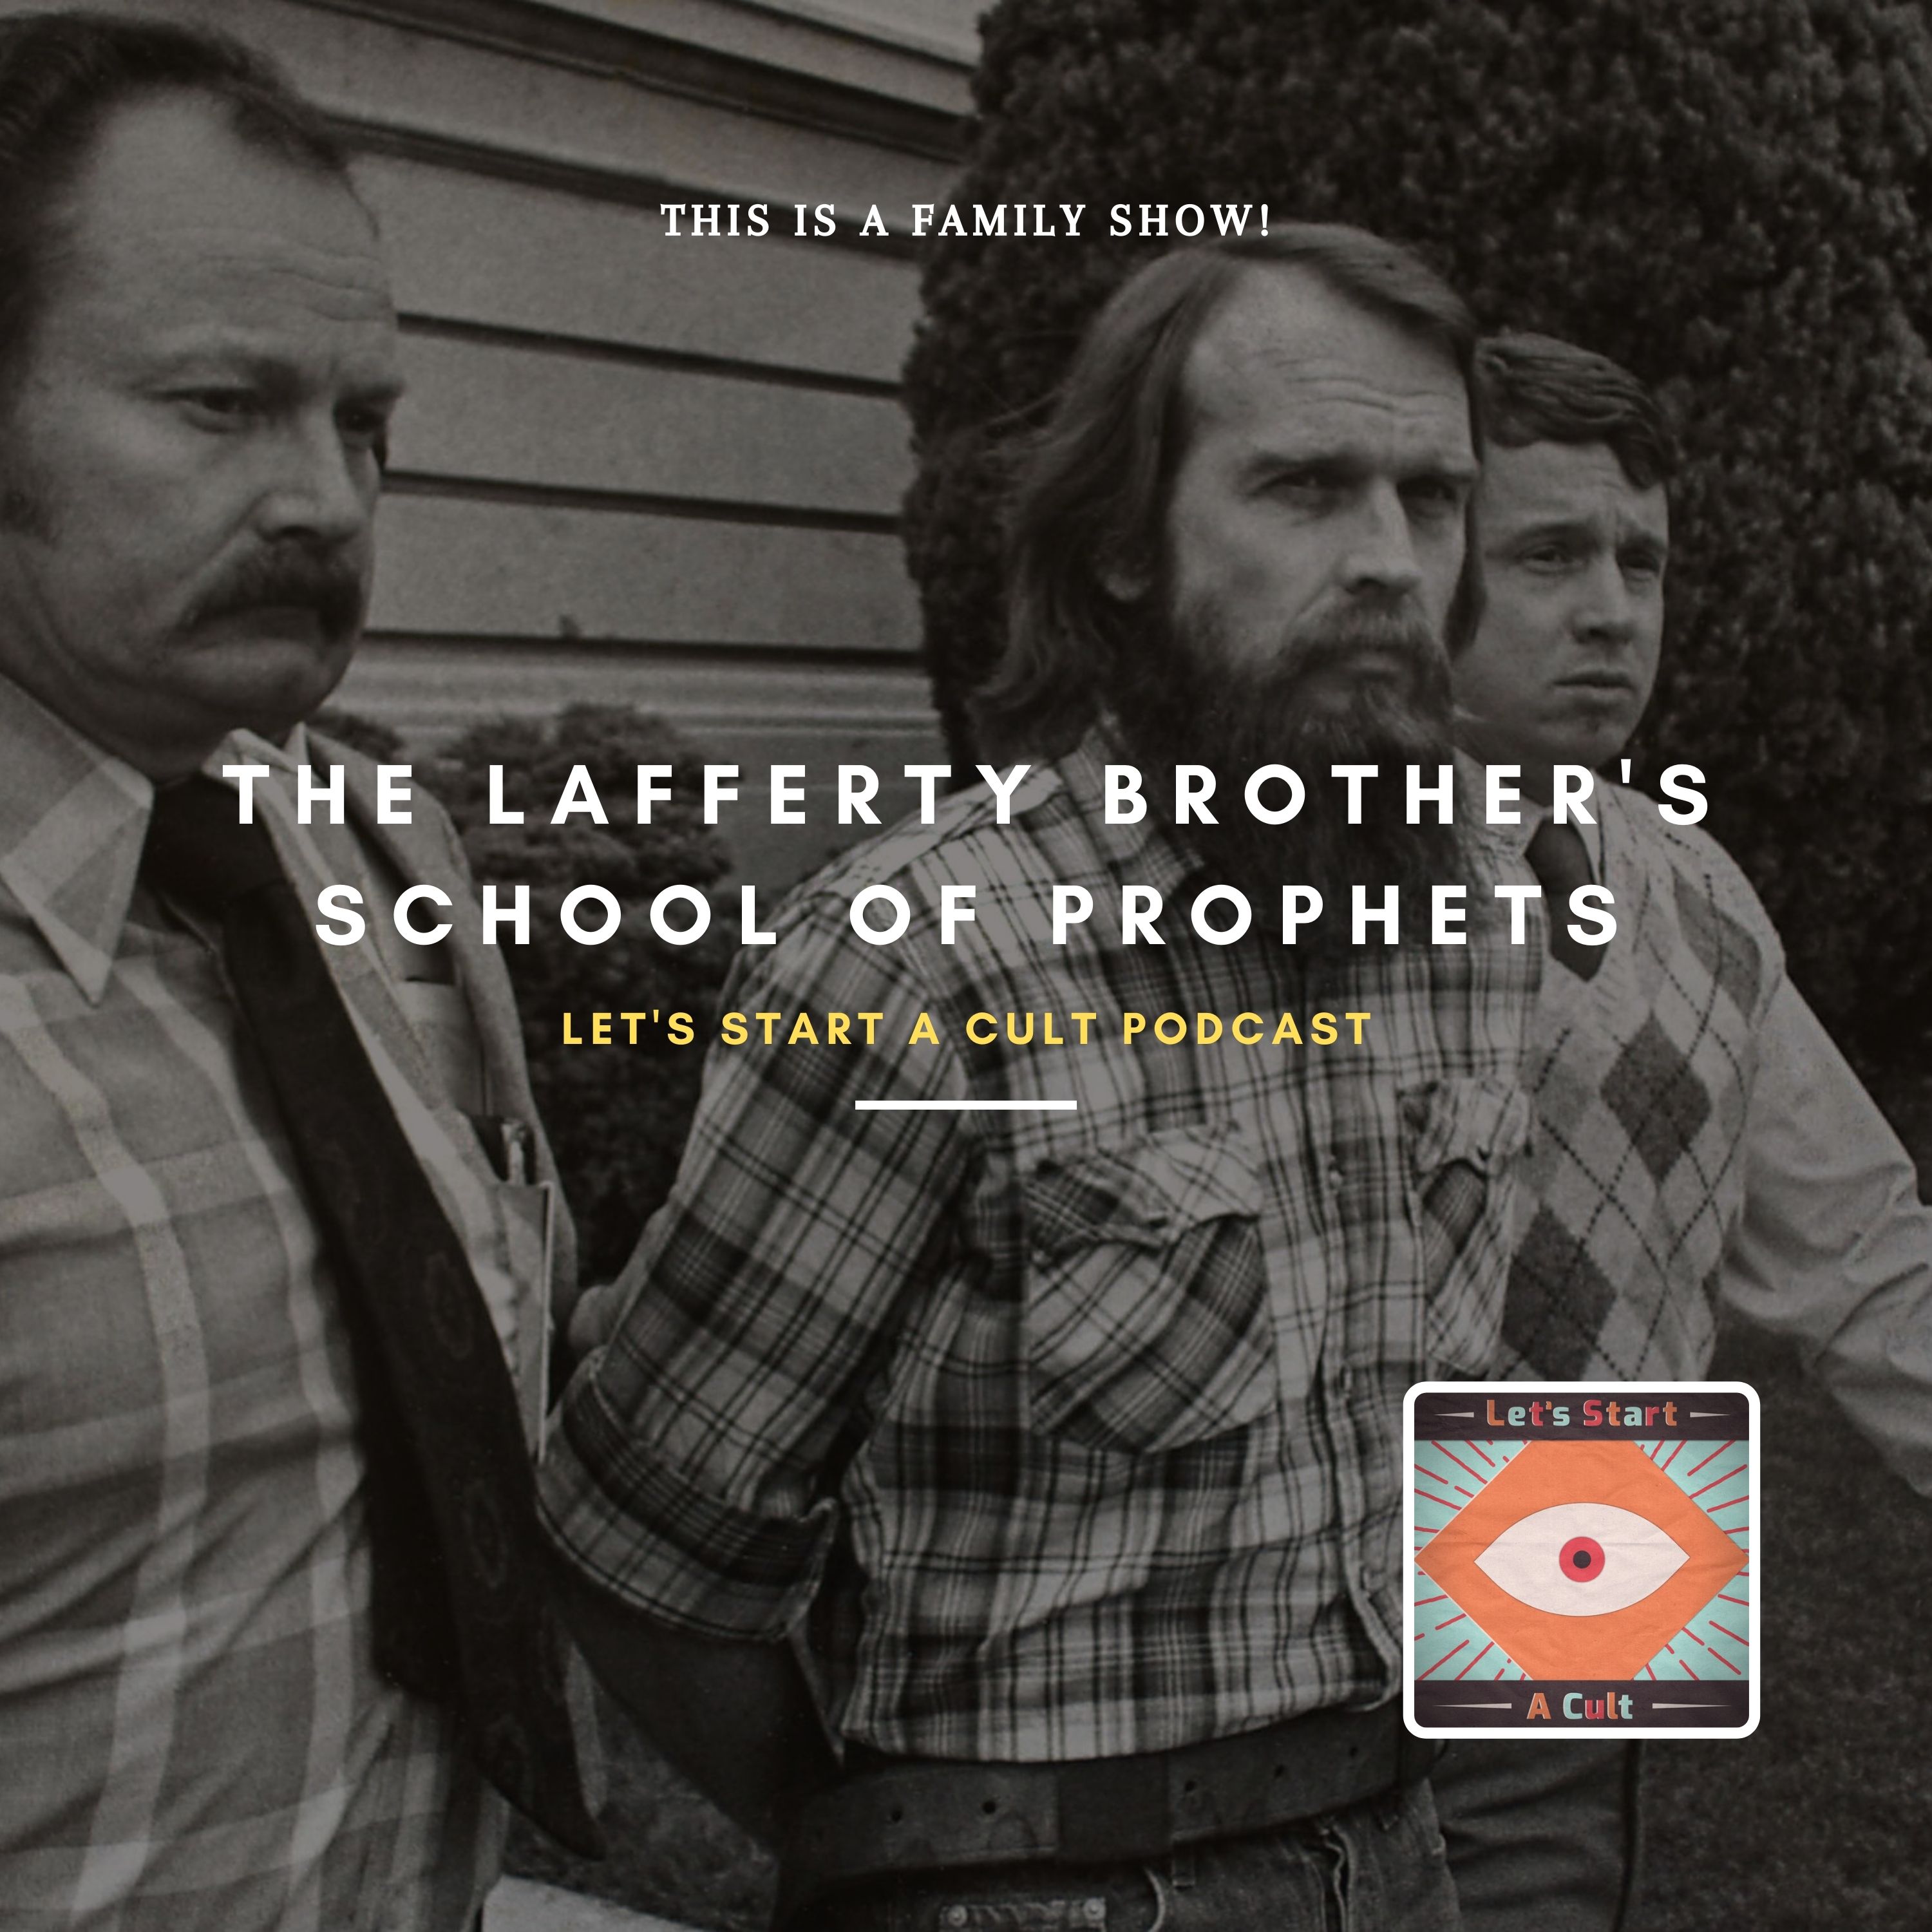 The Lafferty Brothers' School of Prophets | A Family Cult Image